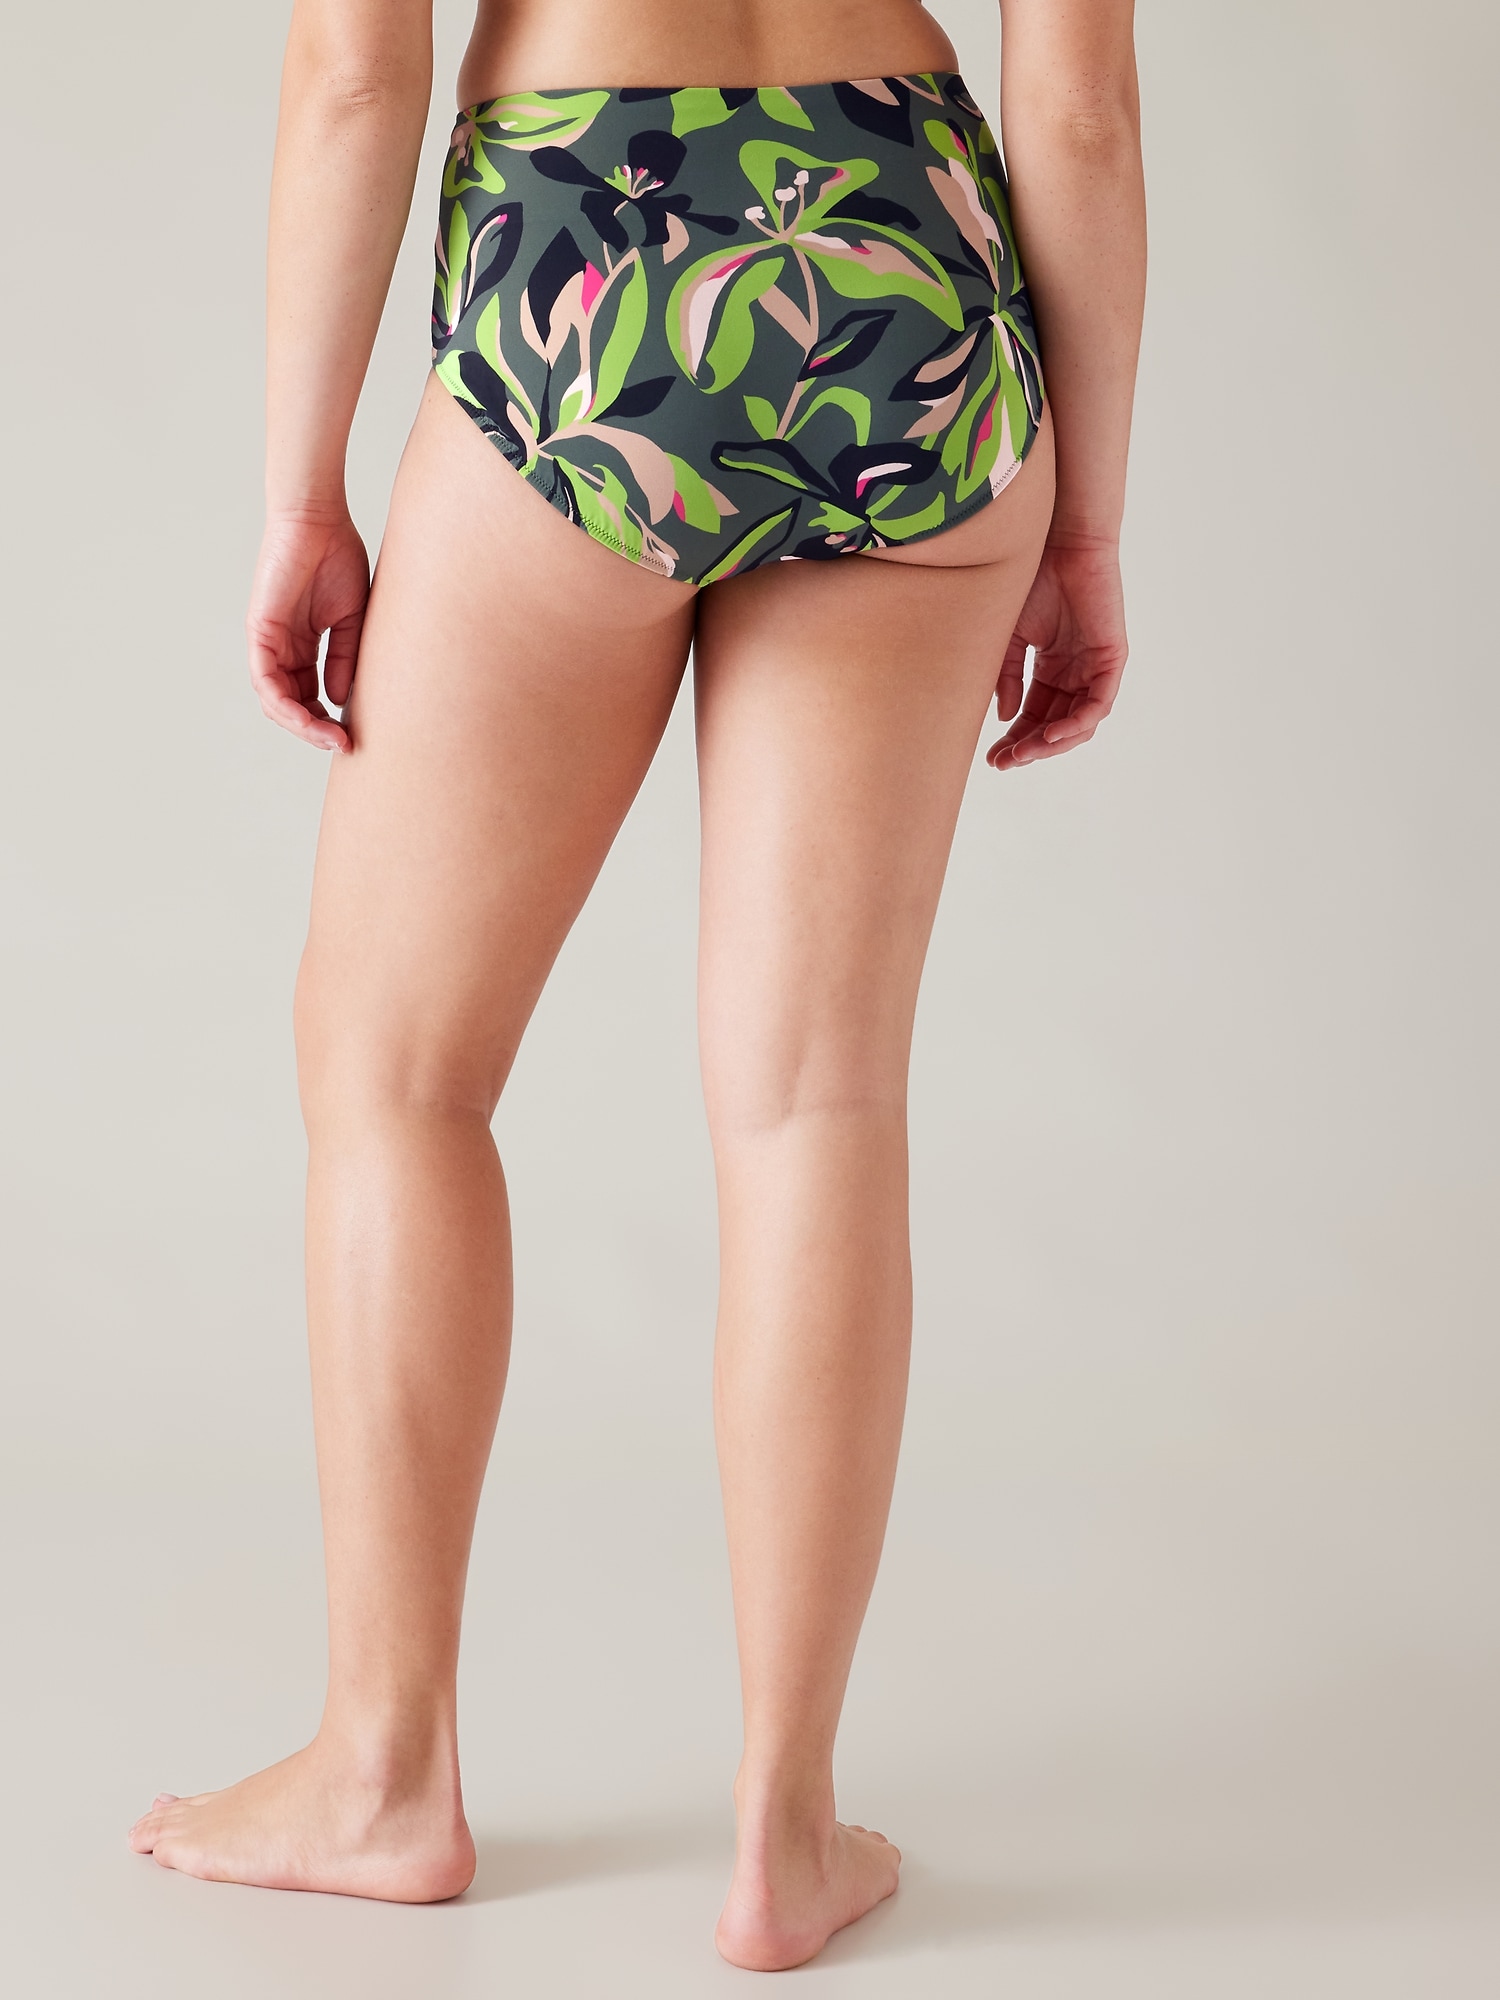 High waisted support swimwear - 78 products